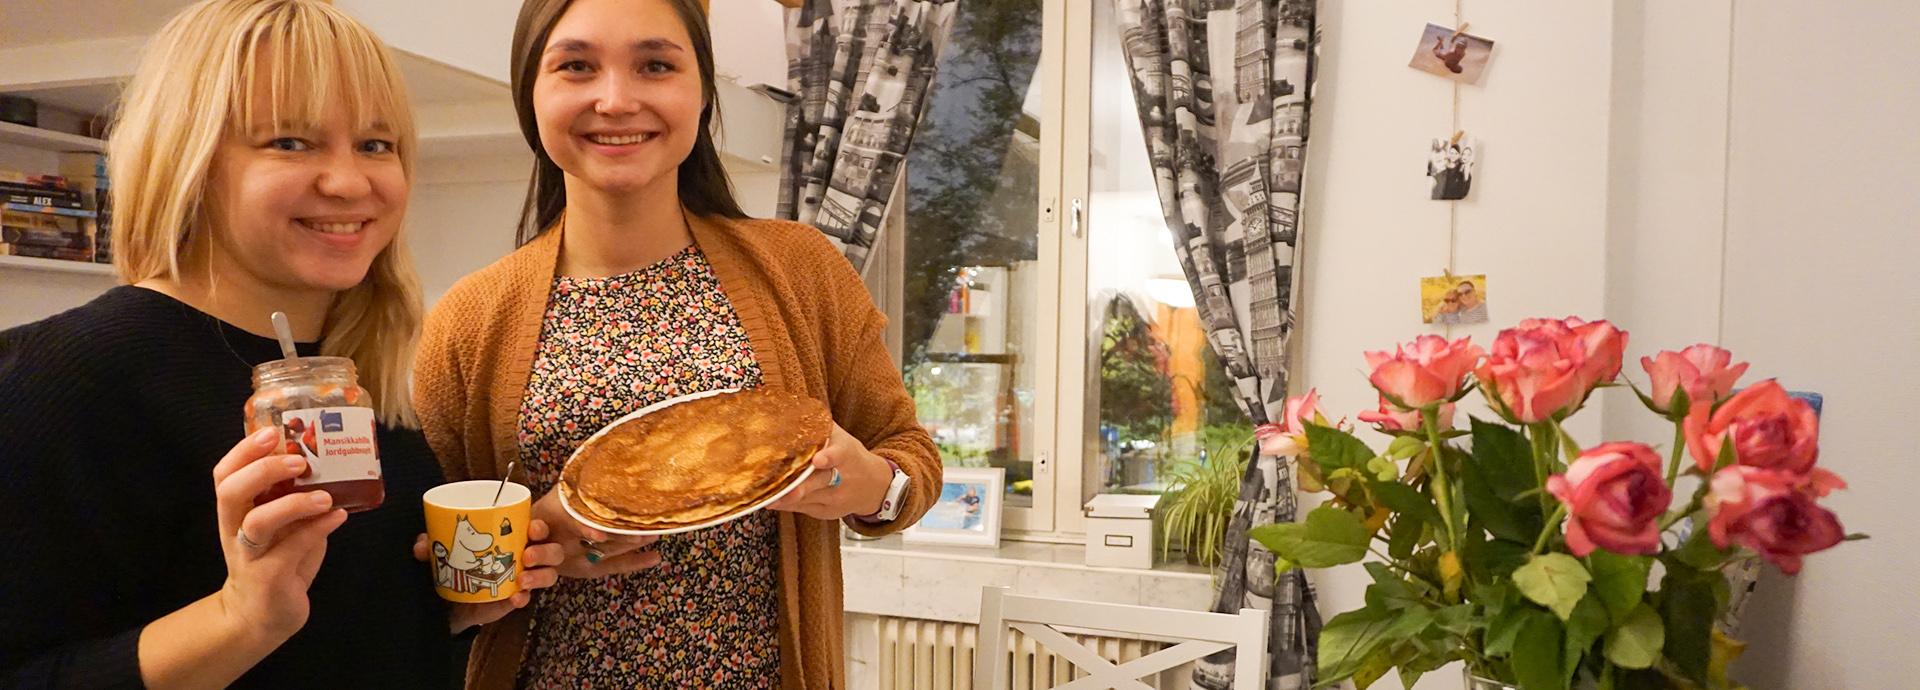 Fulbright alumna and a grantee smiling at the camera. They are holding a plate of Finnish pancakes they have just made and a jar of jam. There are pink roses on in a vase on their right.